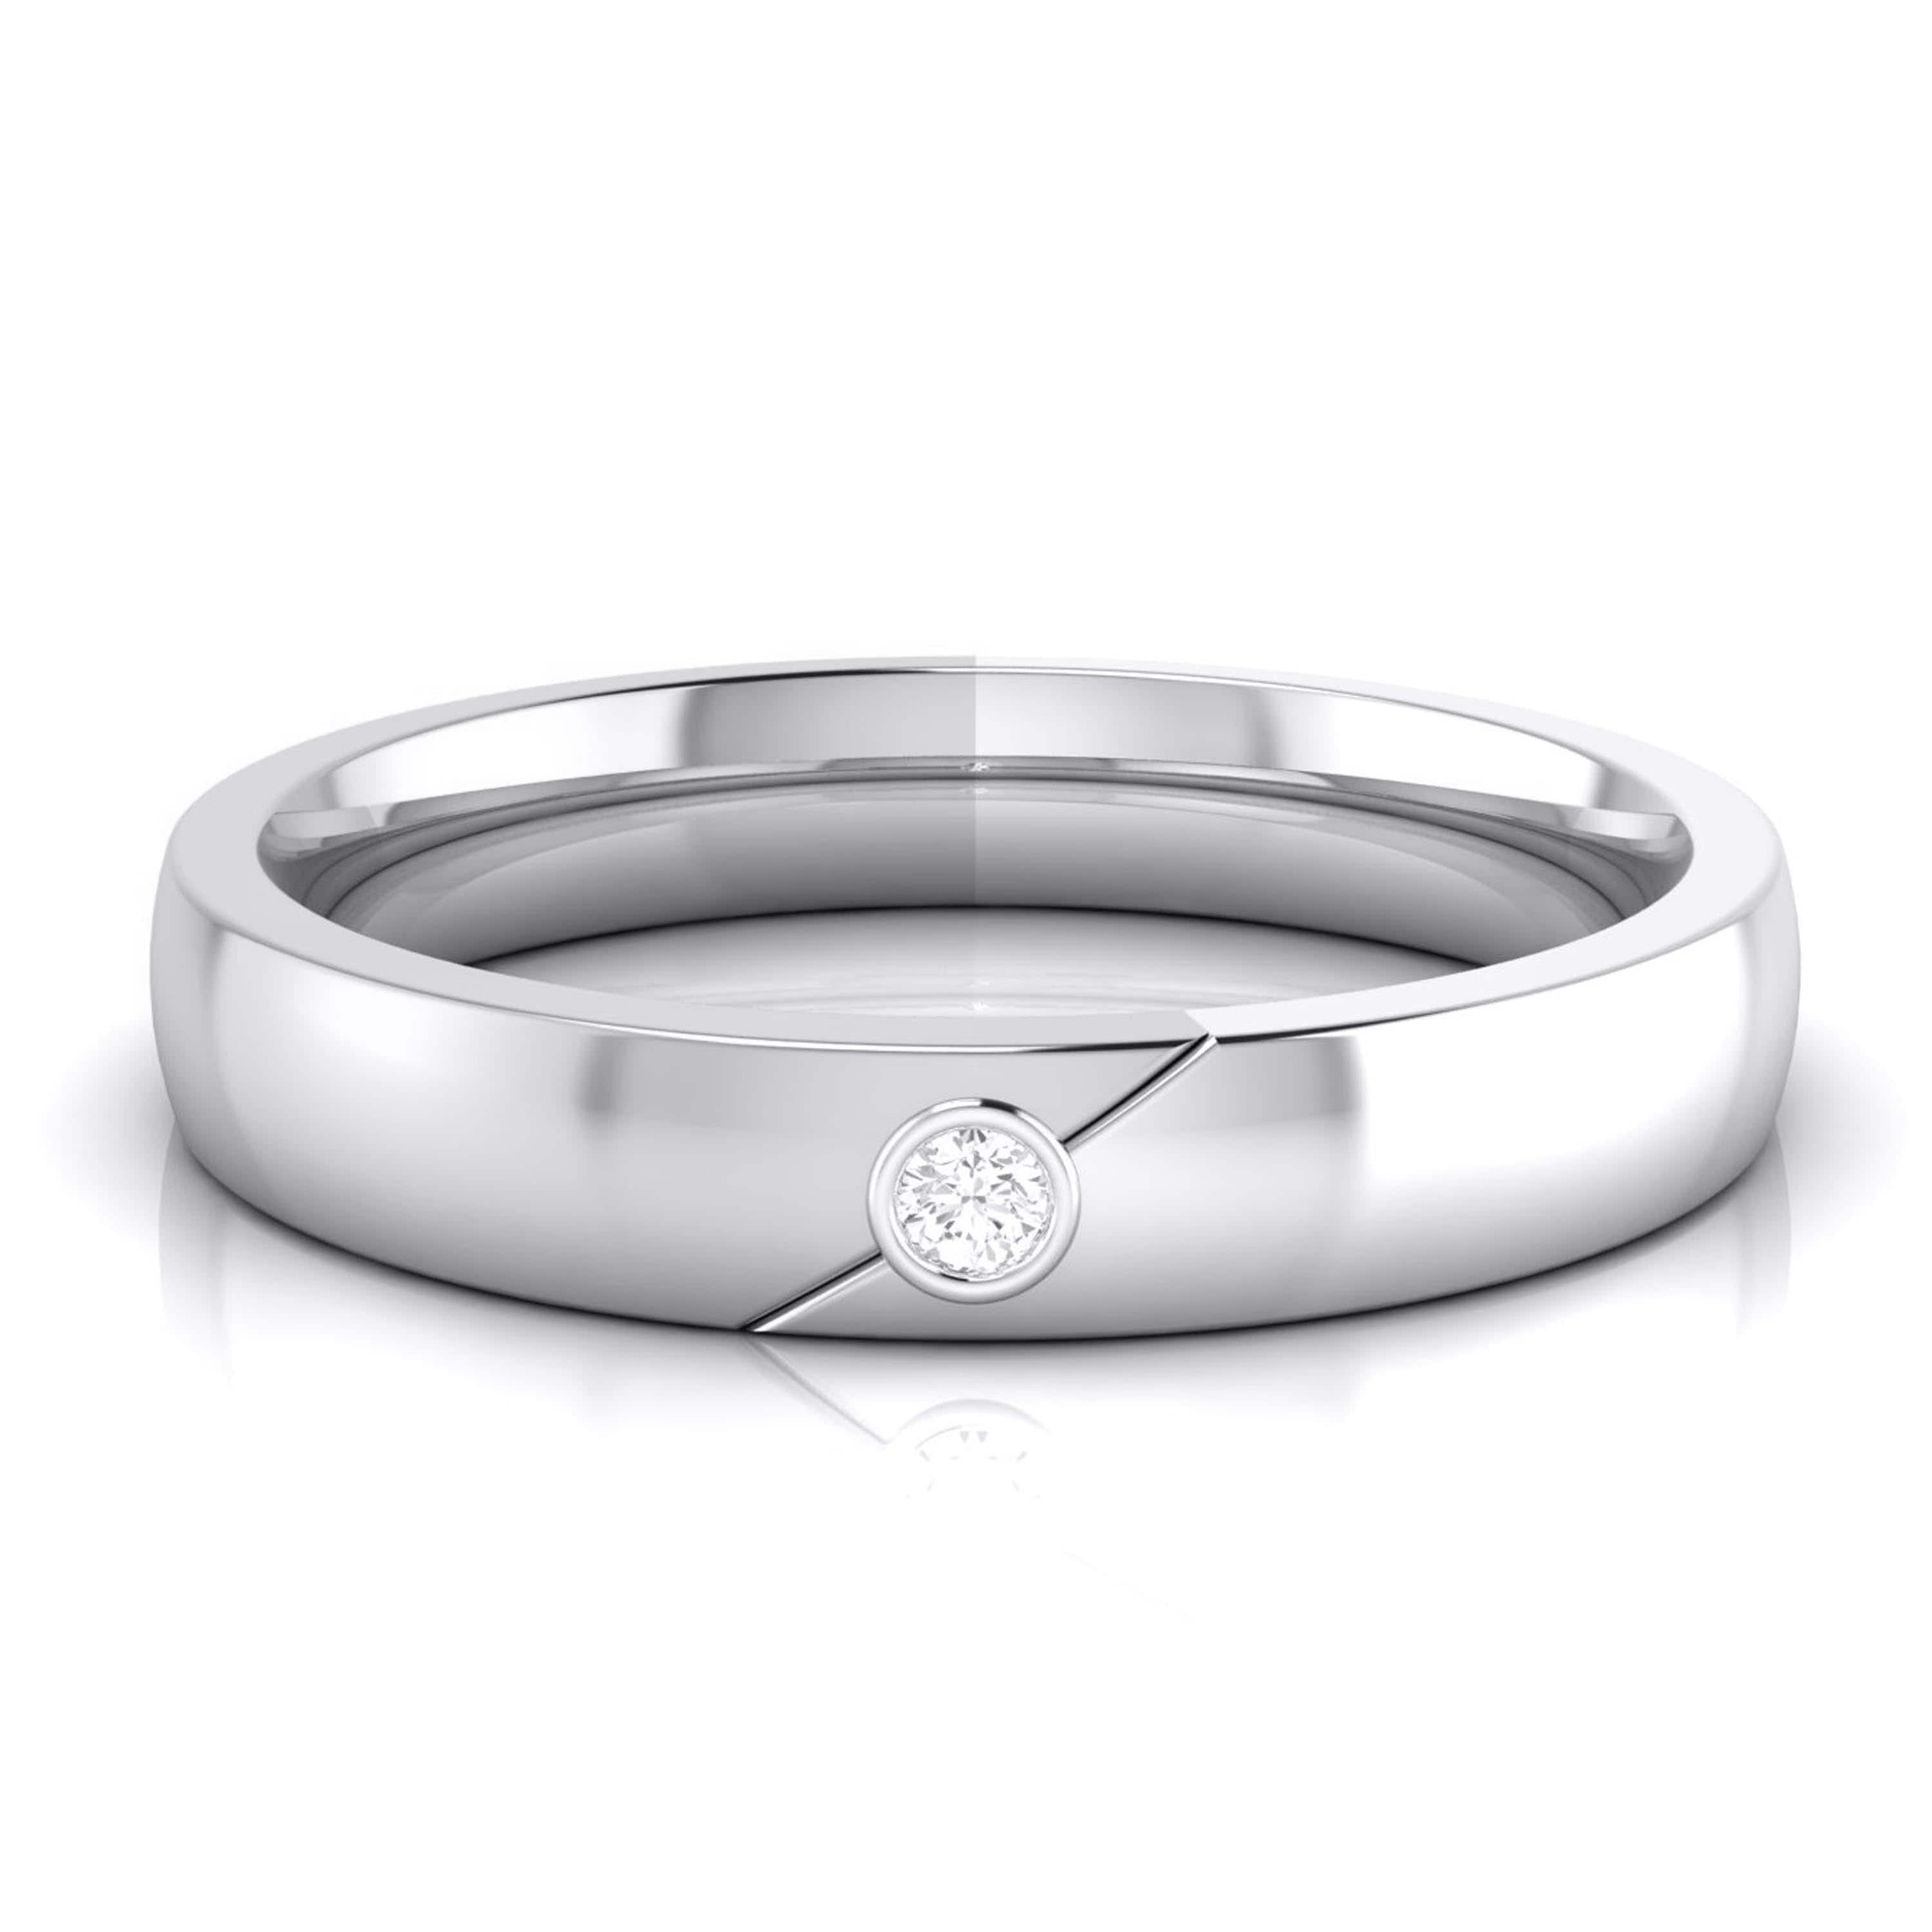 Connected As One Platinum Wedding Bands |